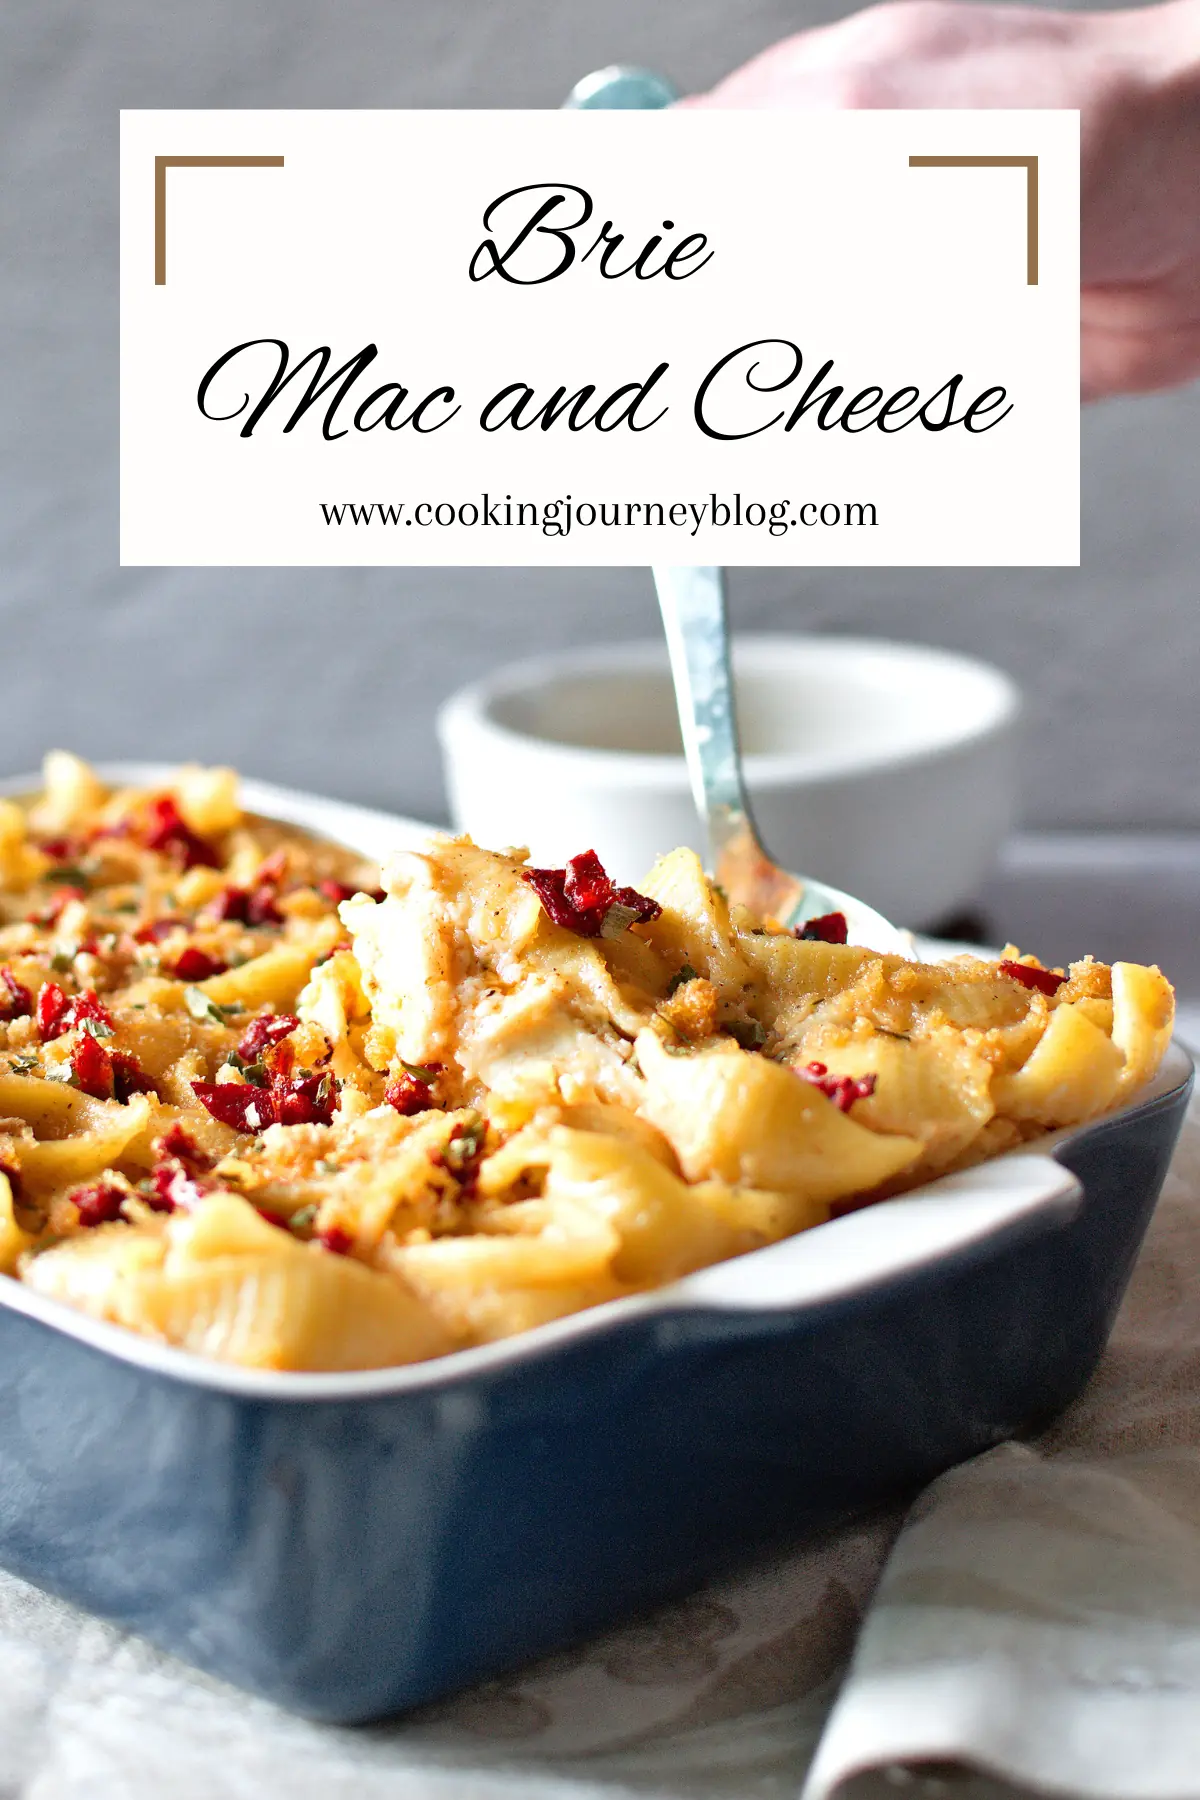 Brie Mac and Cheese in a blue baking tray